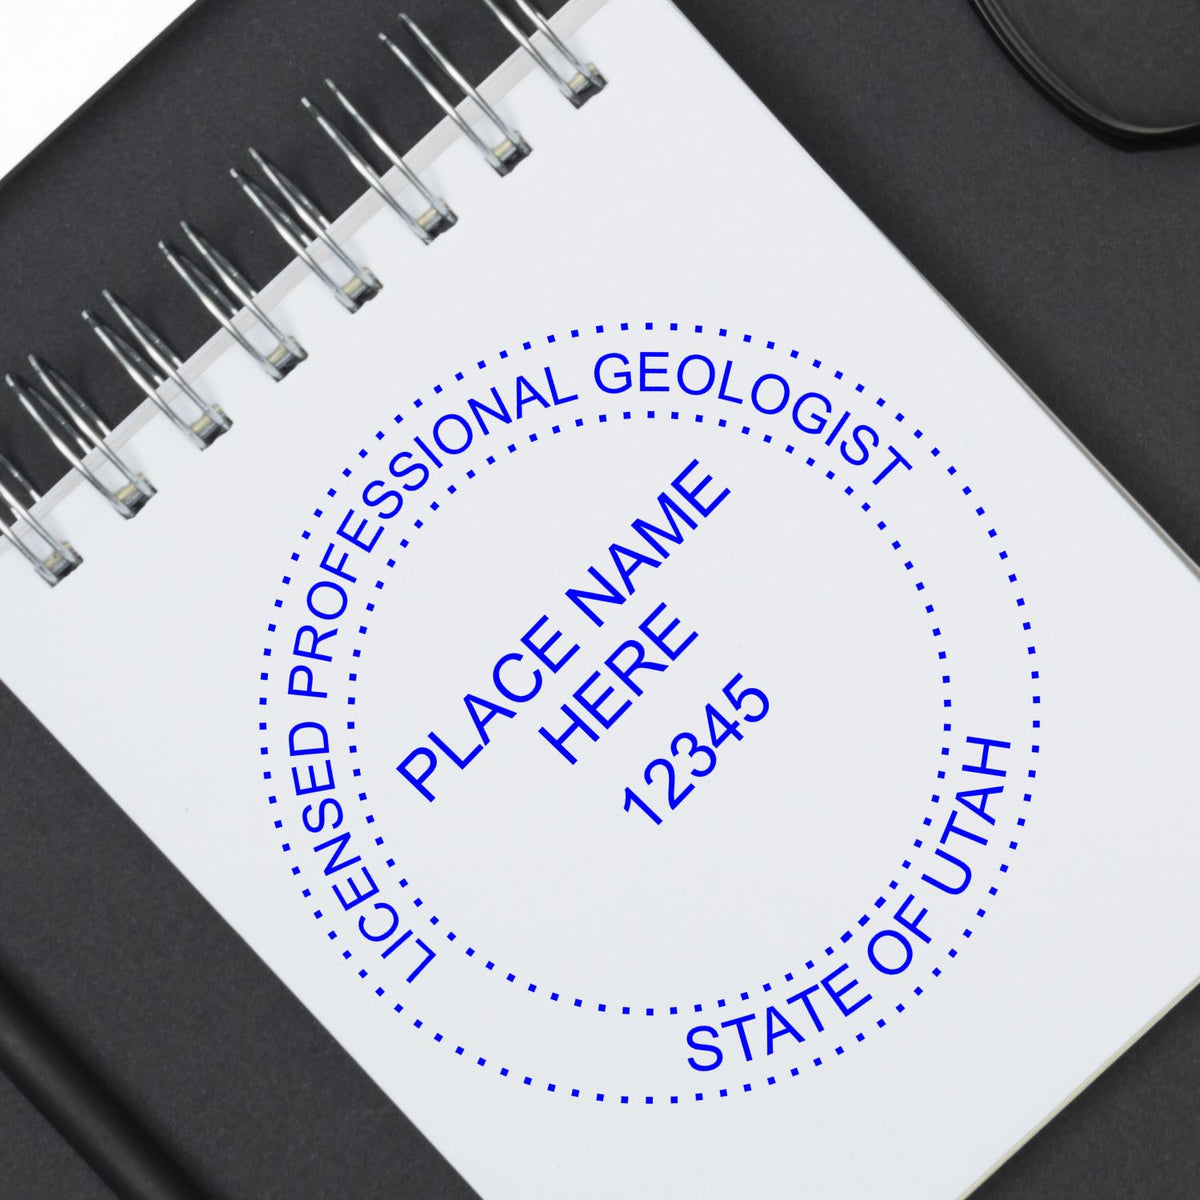 The Slim Pre-Inked Utah Professional Geologist Seal Stamp stamp impression comes to life with a crisp, detailed image stamped on paper - showcasing true professional quality.